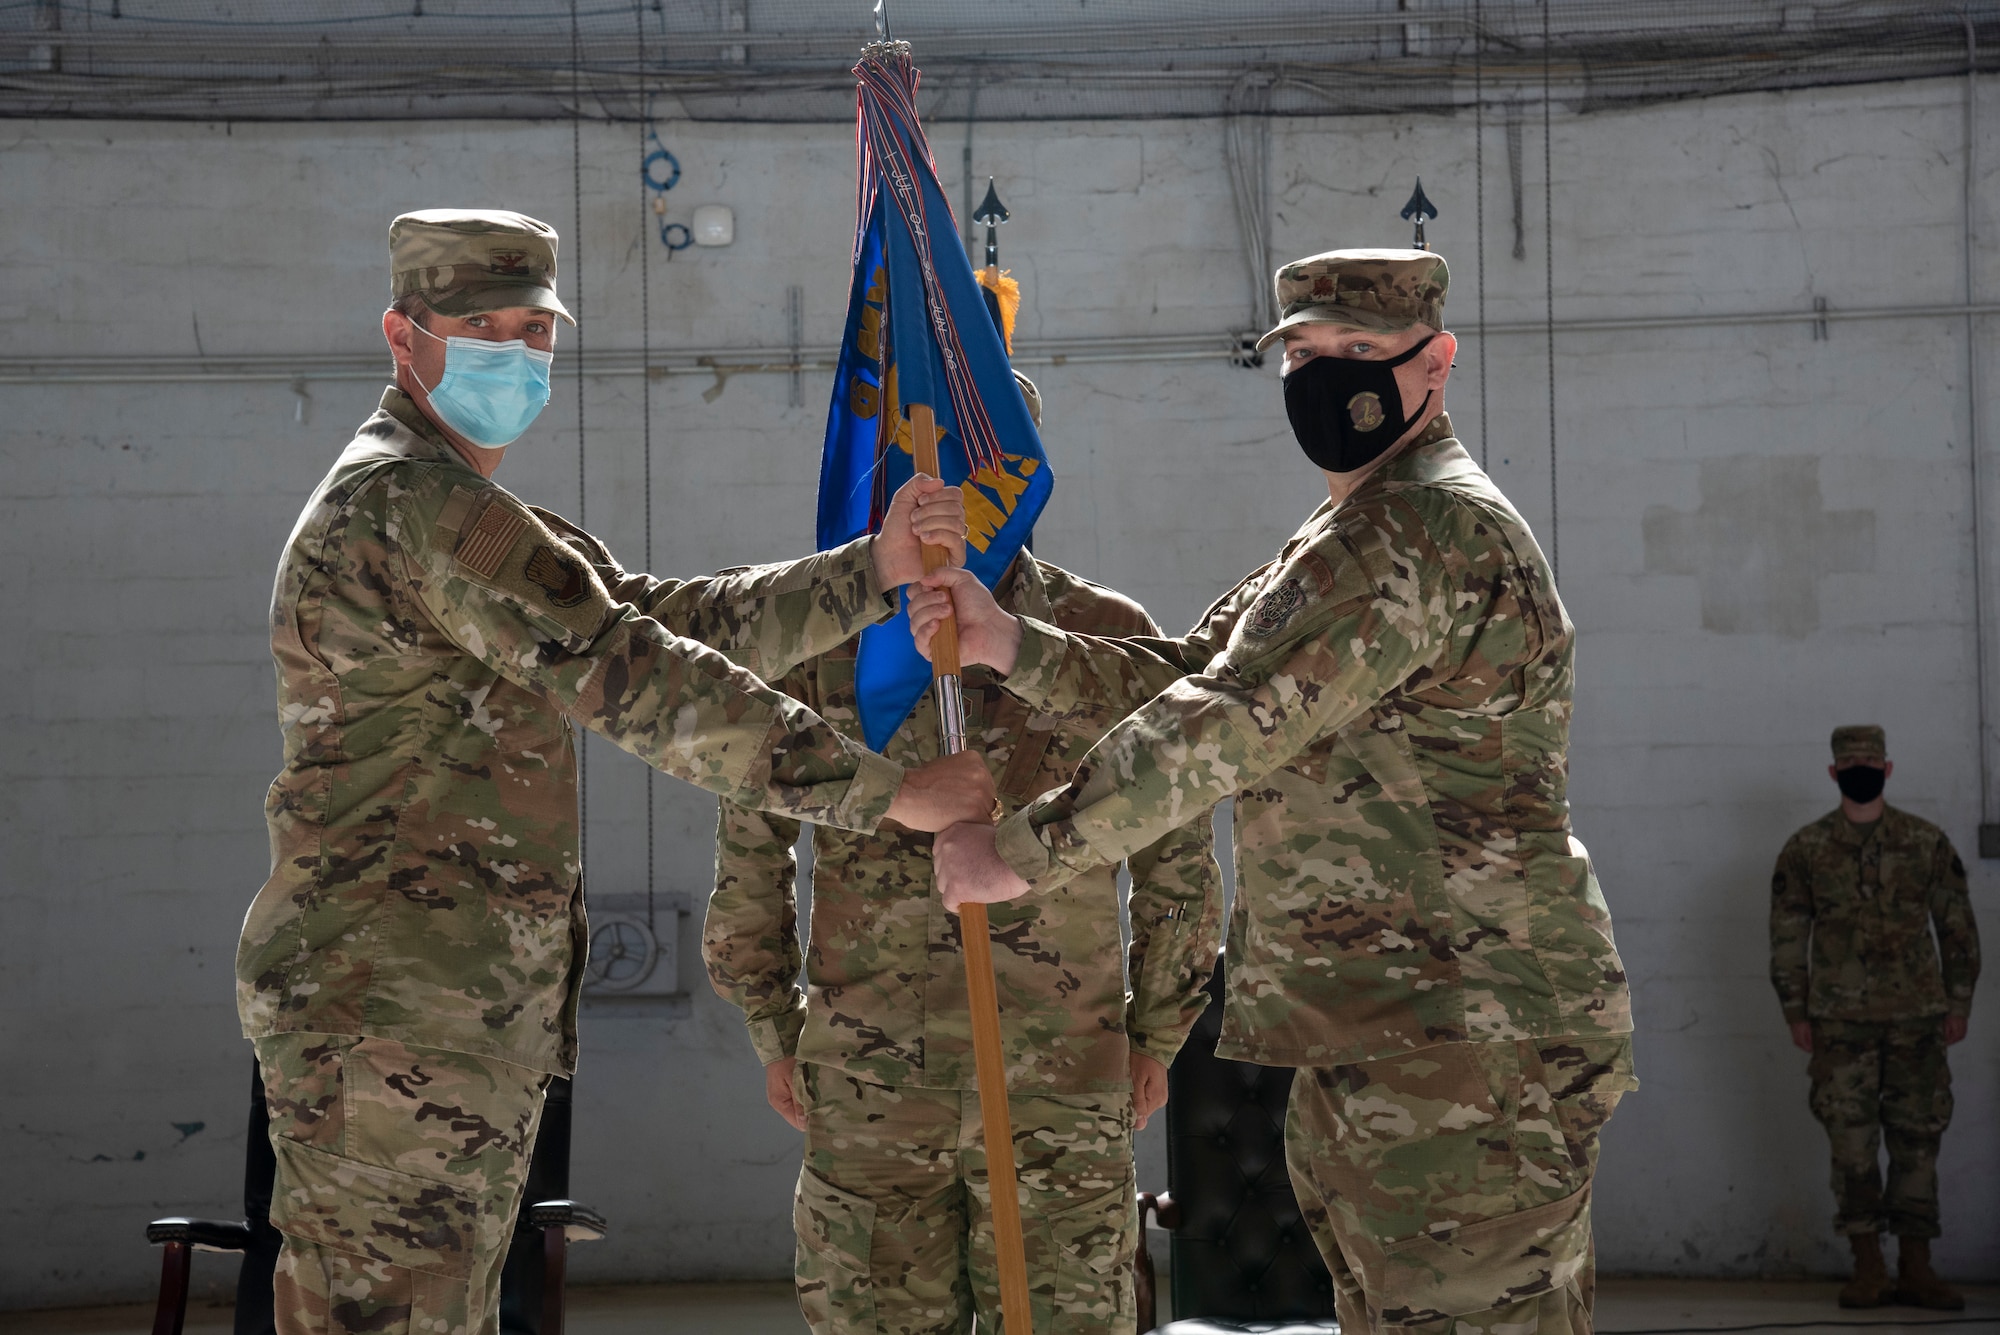 U.S. Air Force Col. Wes Adams, 6th Maintenance Group commander passes the 6th Maintenance Squadron (MXS) guidon to Maj. Aaron W. Darty, incoming 6th MXS commander during a change of command ceremony, May 10, 2021 at MacDill Air Force Base, Florida.